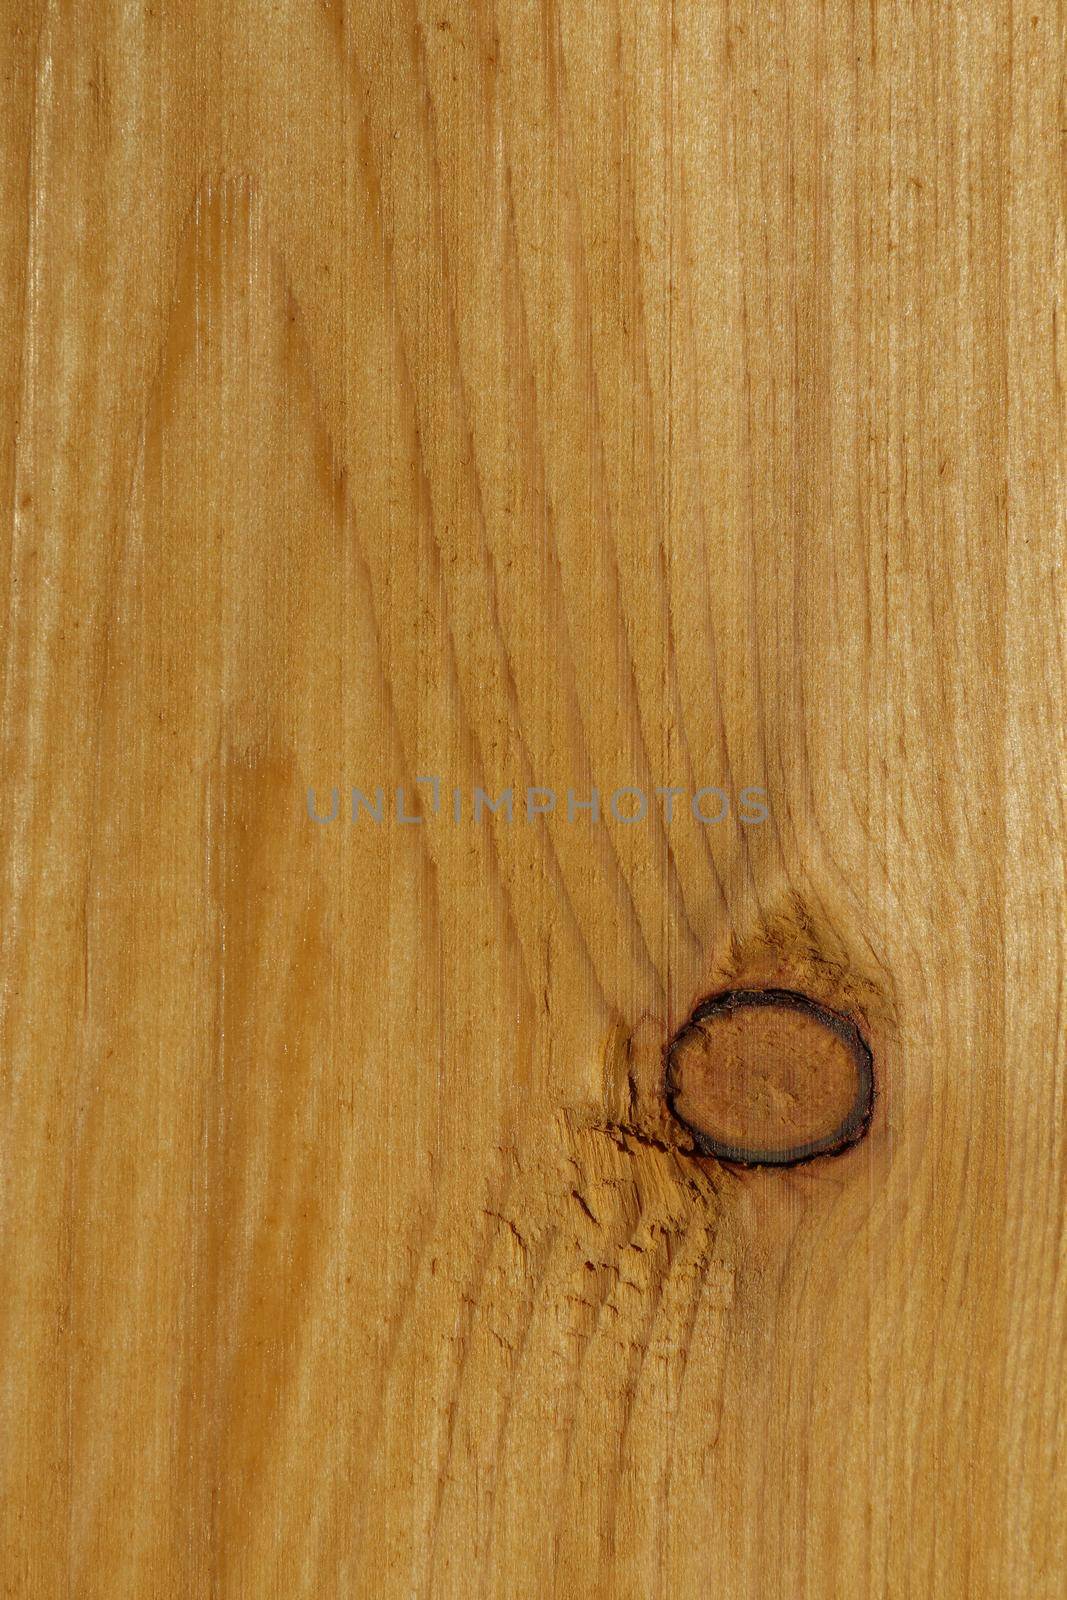 wooden colorful background close up. High quality photo